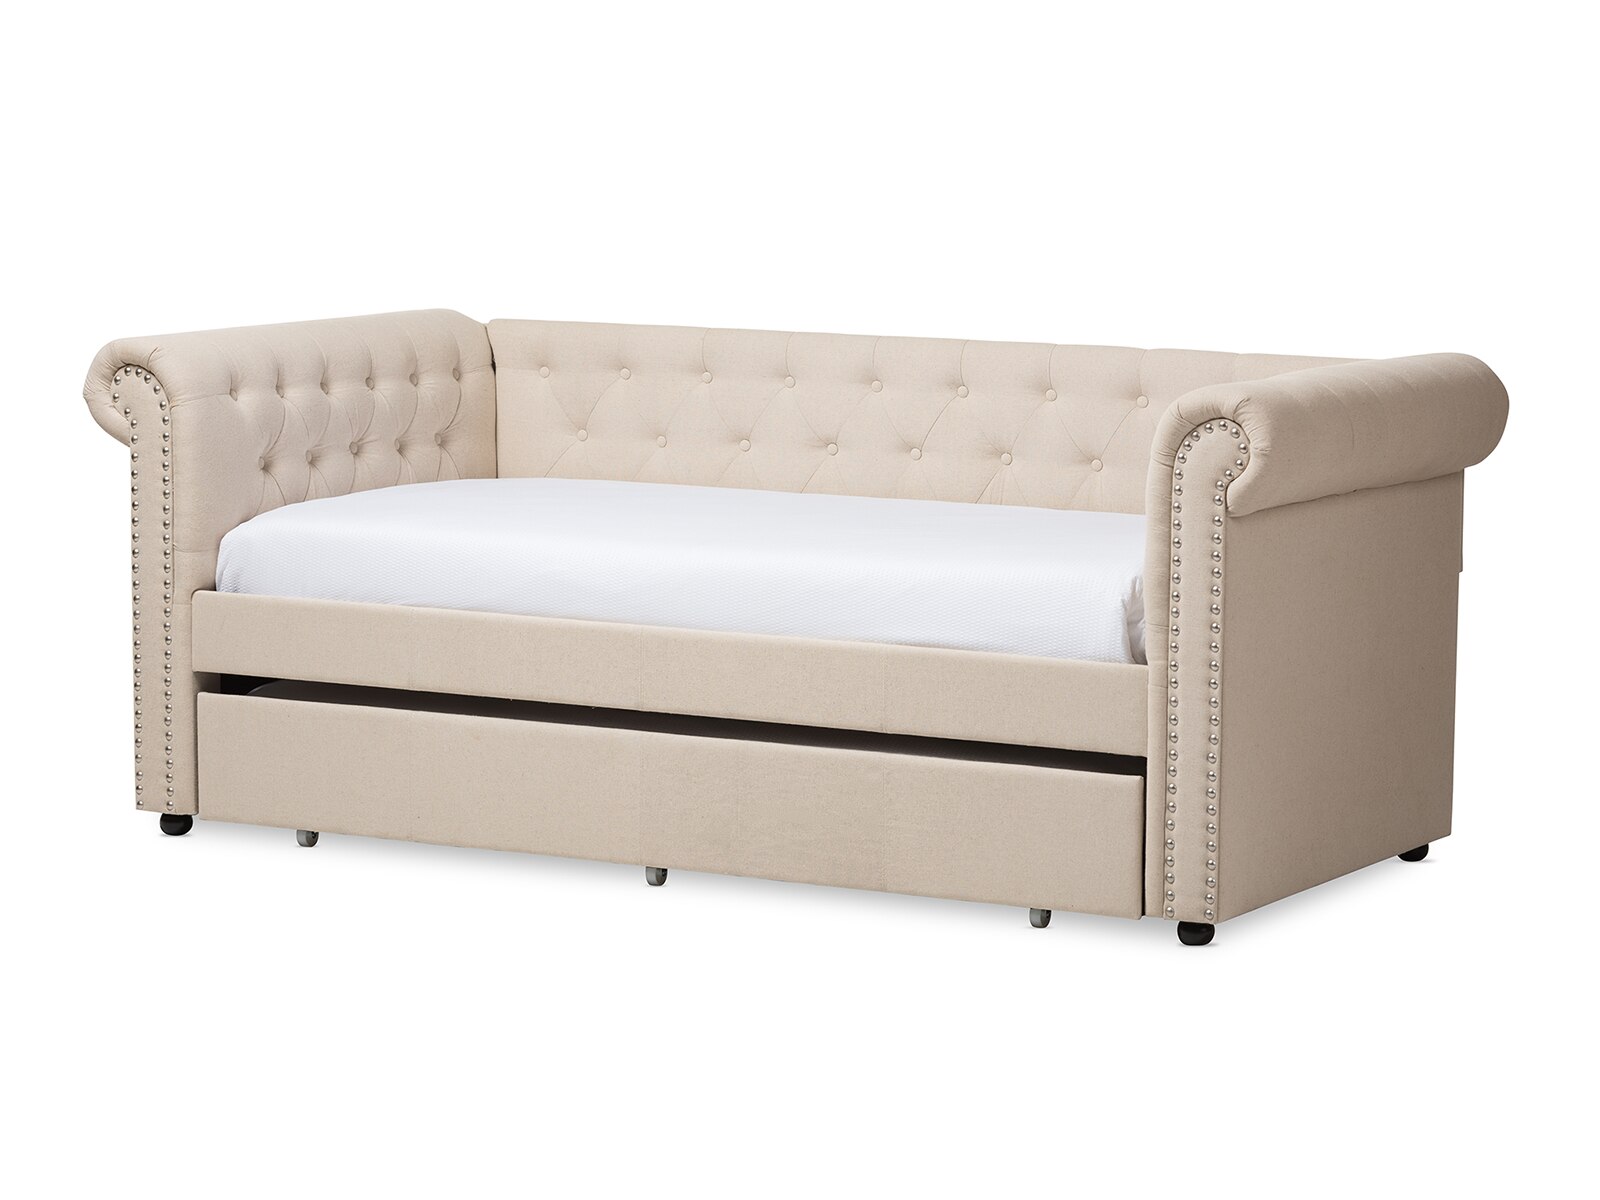 Mabelle Modern & Contemporary Trundle Daybed